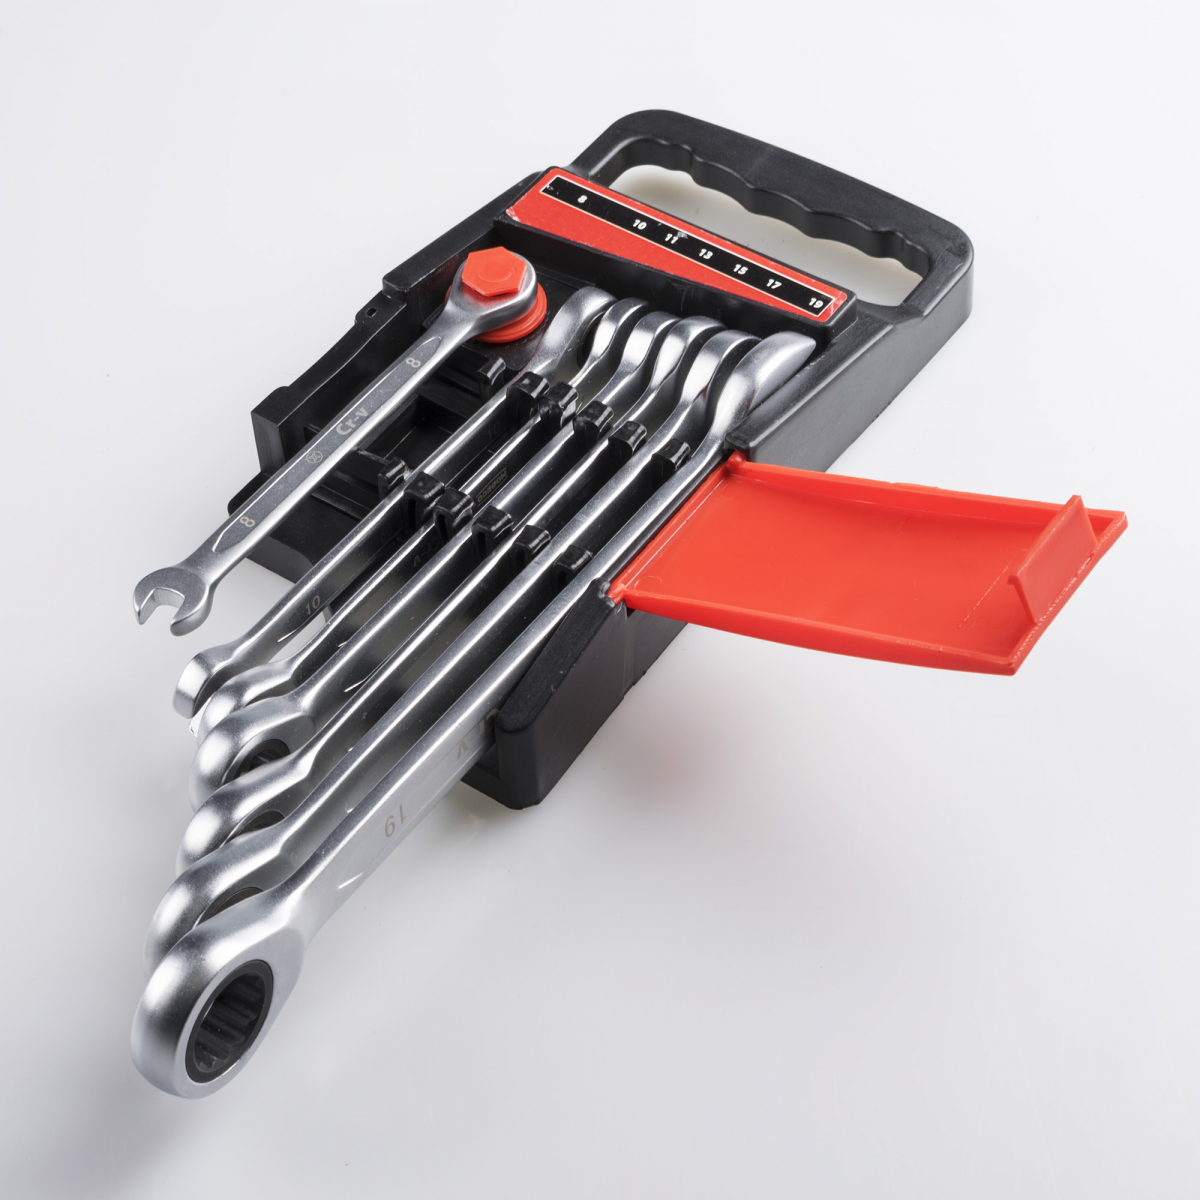 MN-59-6 Set of 7 ratchet combination wrenches